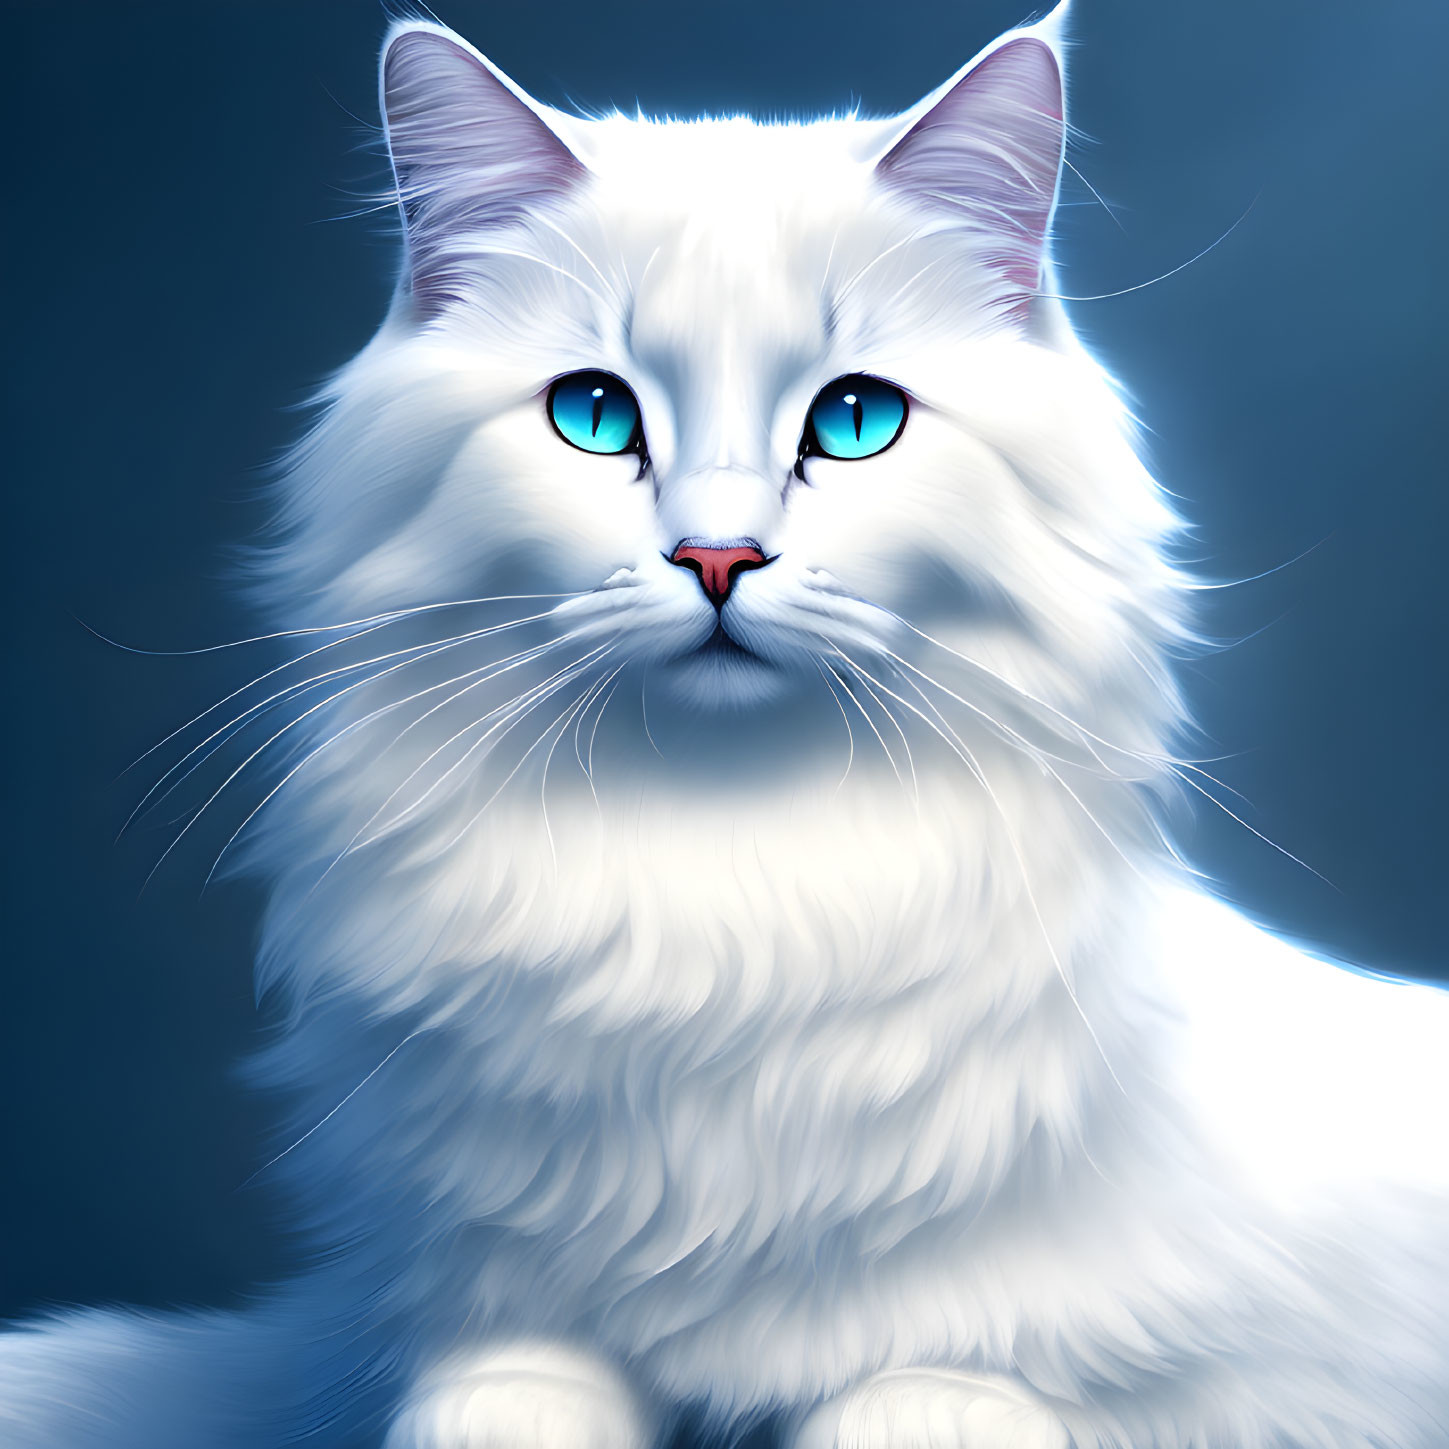 White Fluffy Cat with Blue Eyes and Long Whiskers on Dark Background